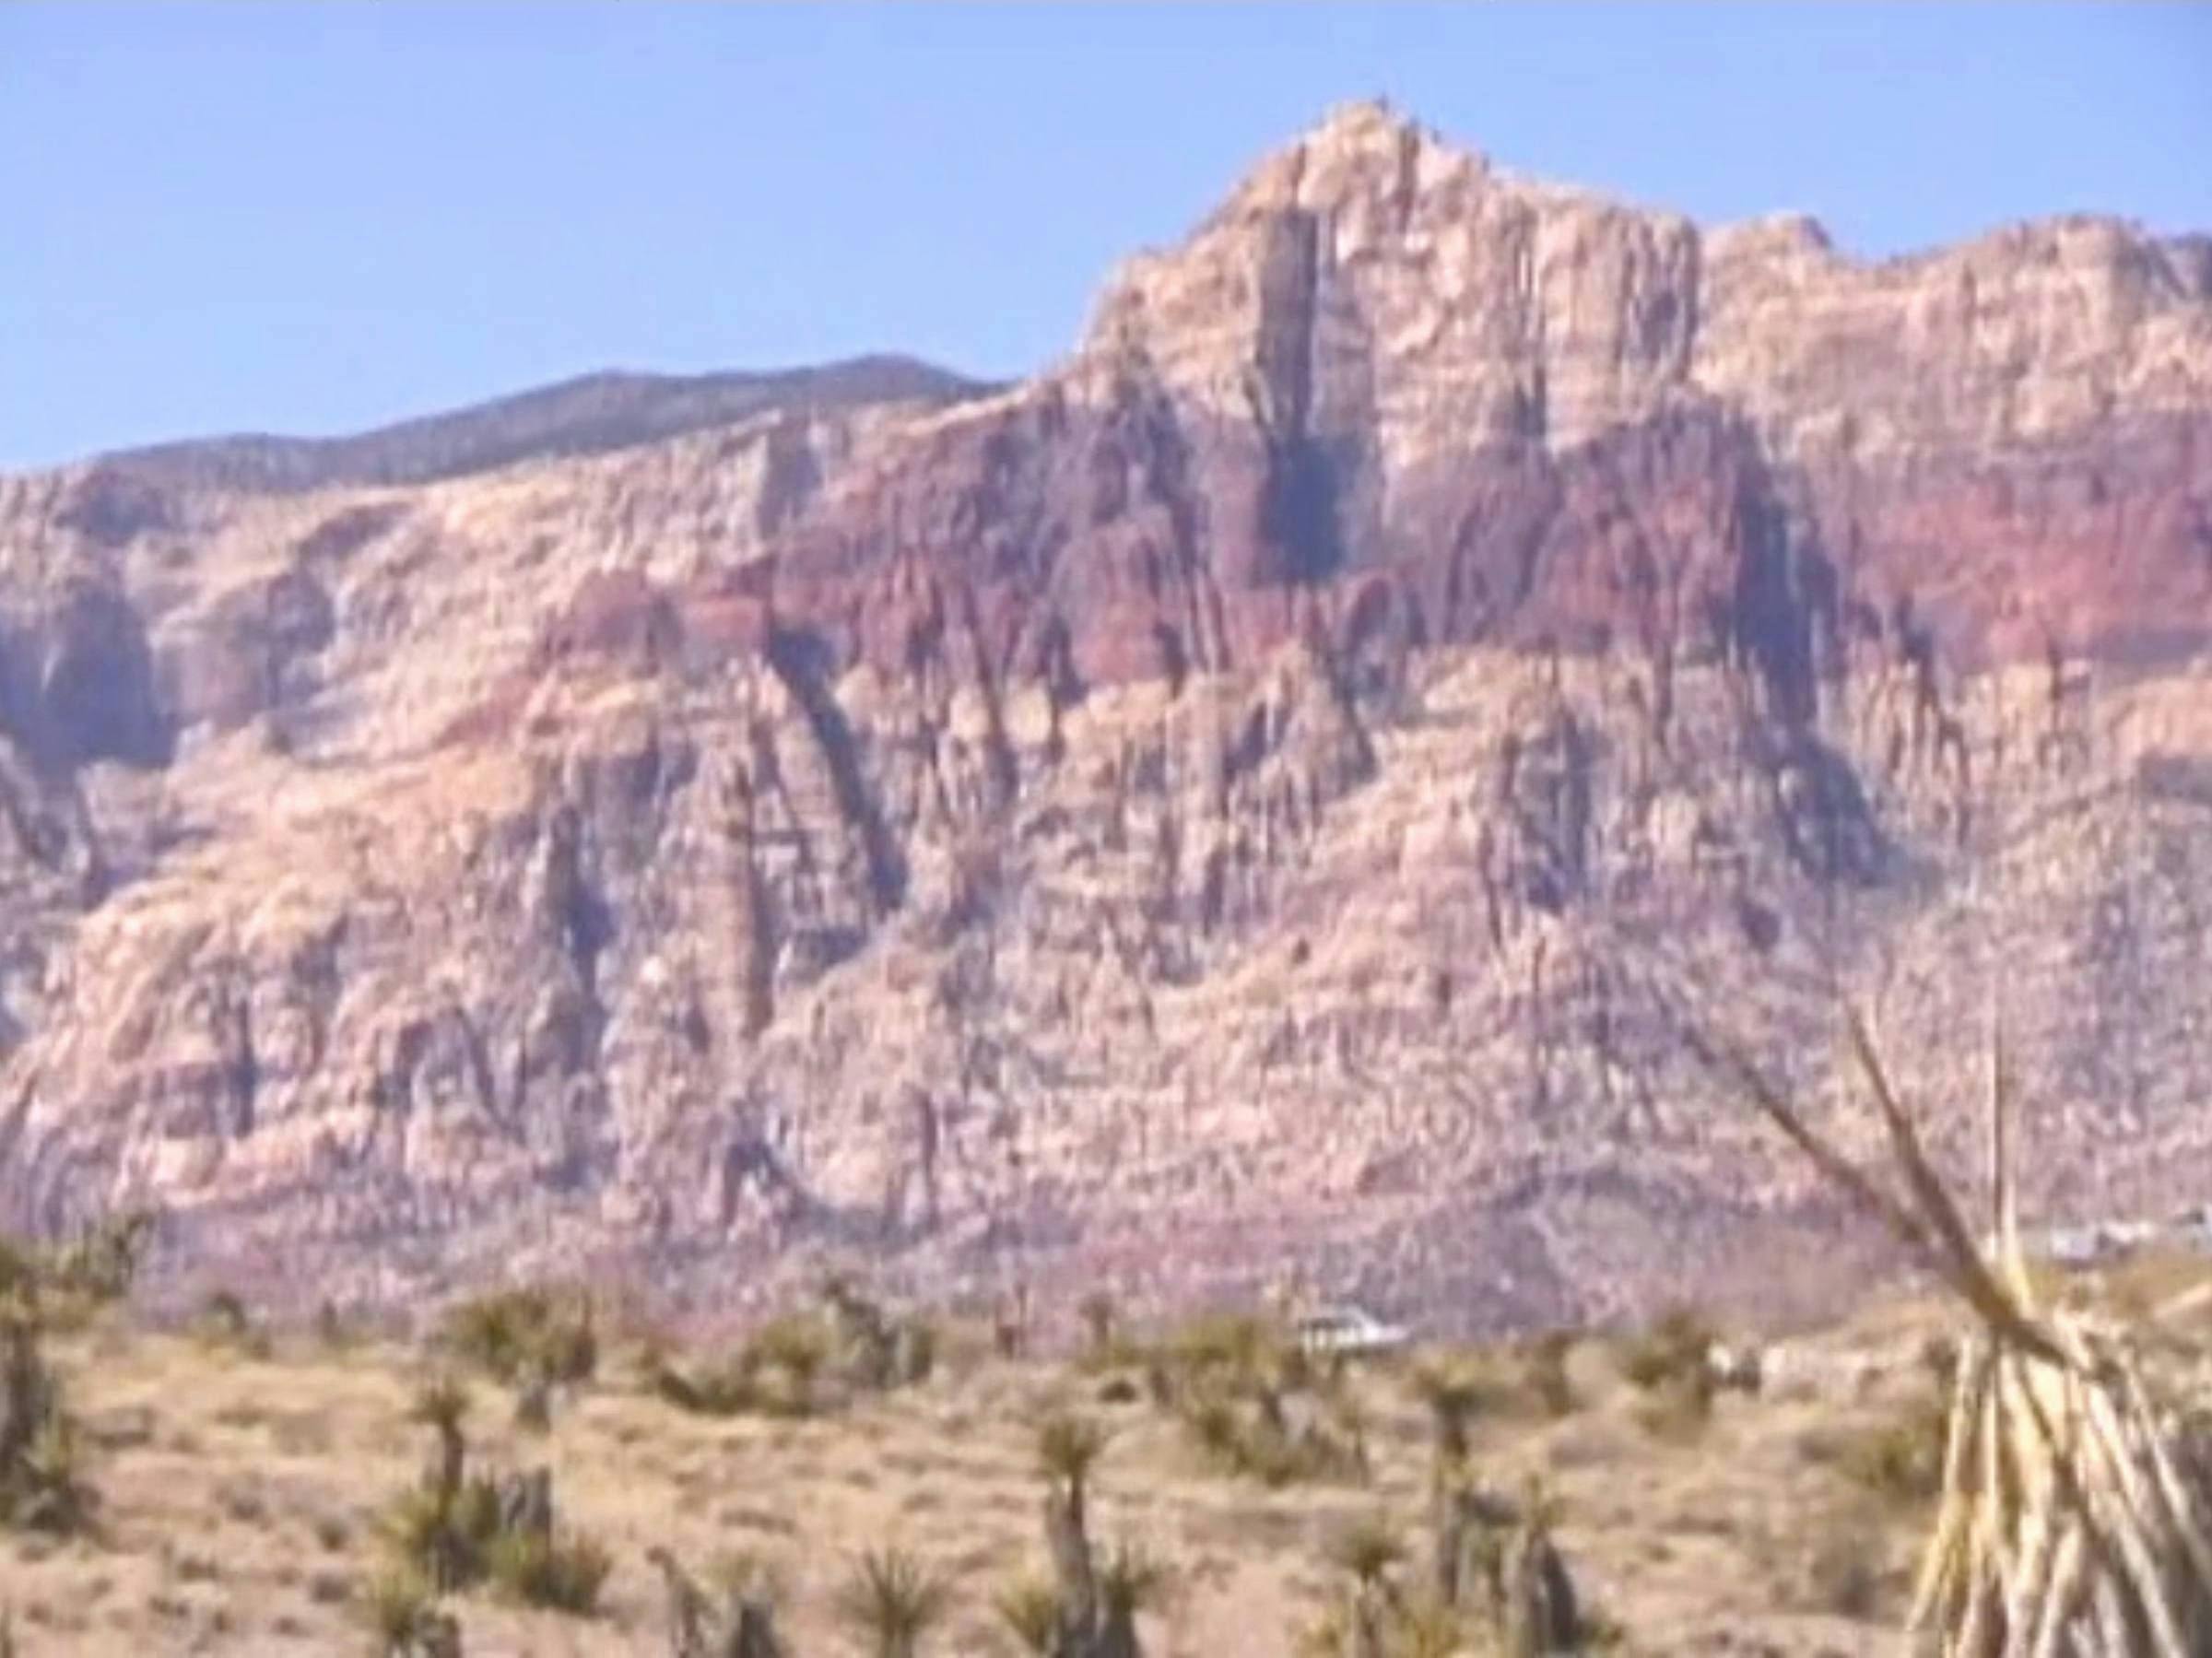 a image of mountains against a blue sky. Cacti are visible in the foreground